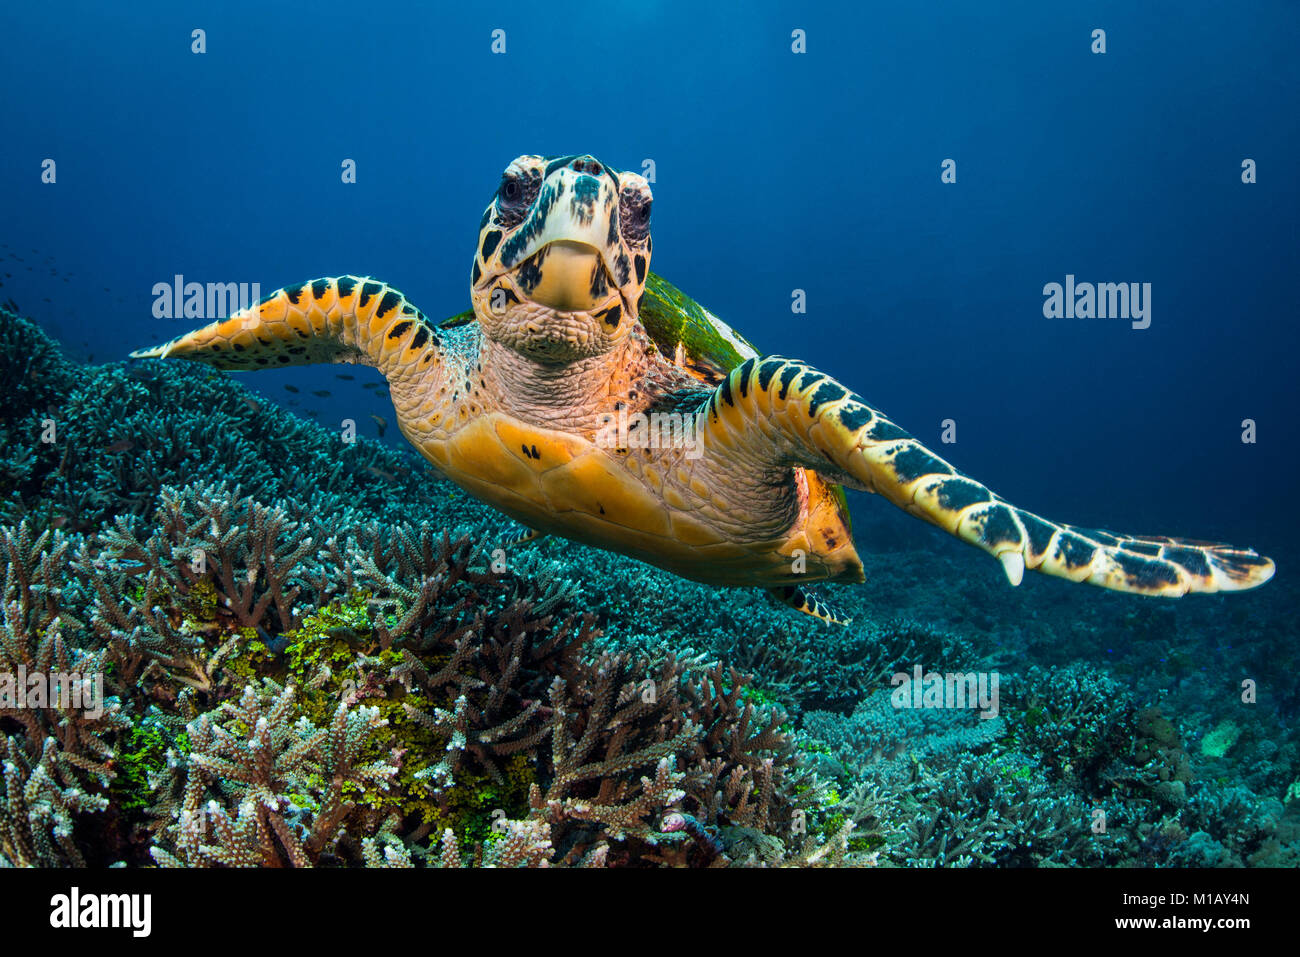 A Hawksbill Sea Turtle swimming towards the camera, over a stunning coral reef in Komodo National Park, Indonesia. Stock Photo